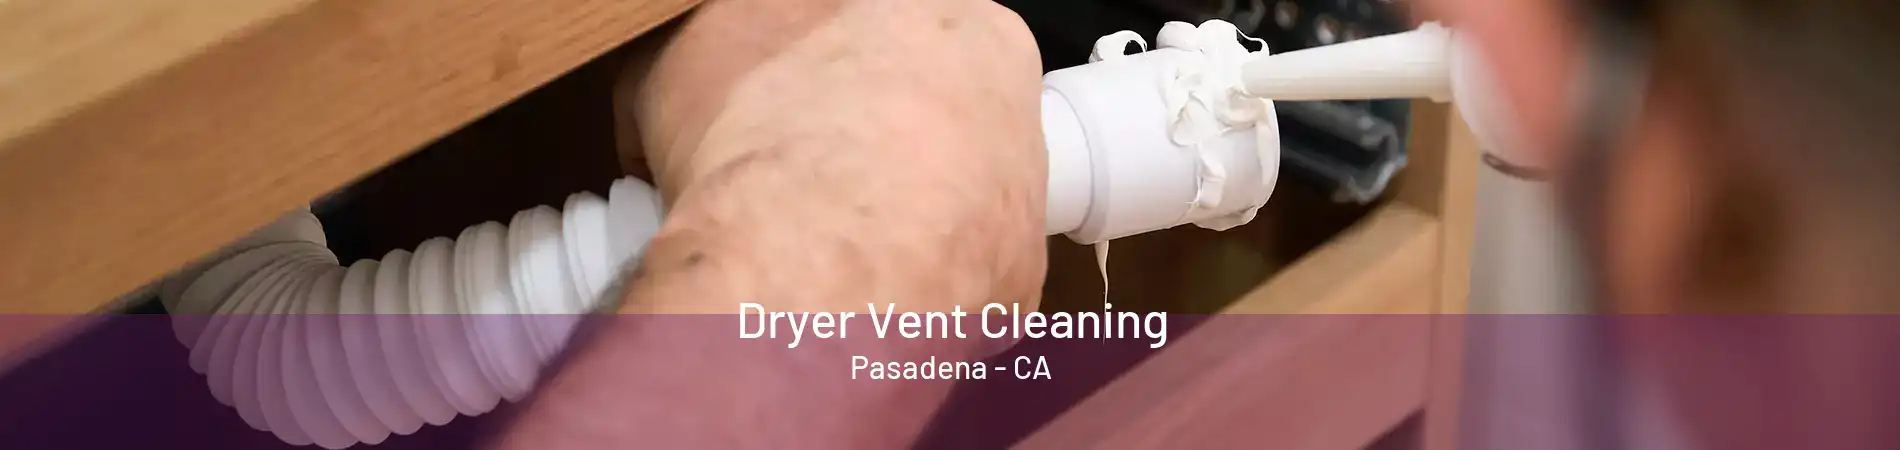 Dryer Vent Cleaning Pasadena - CA